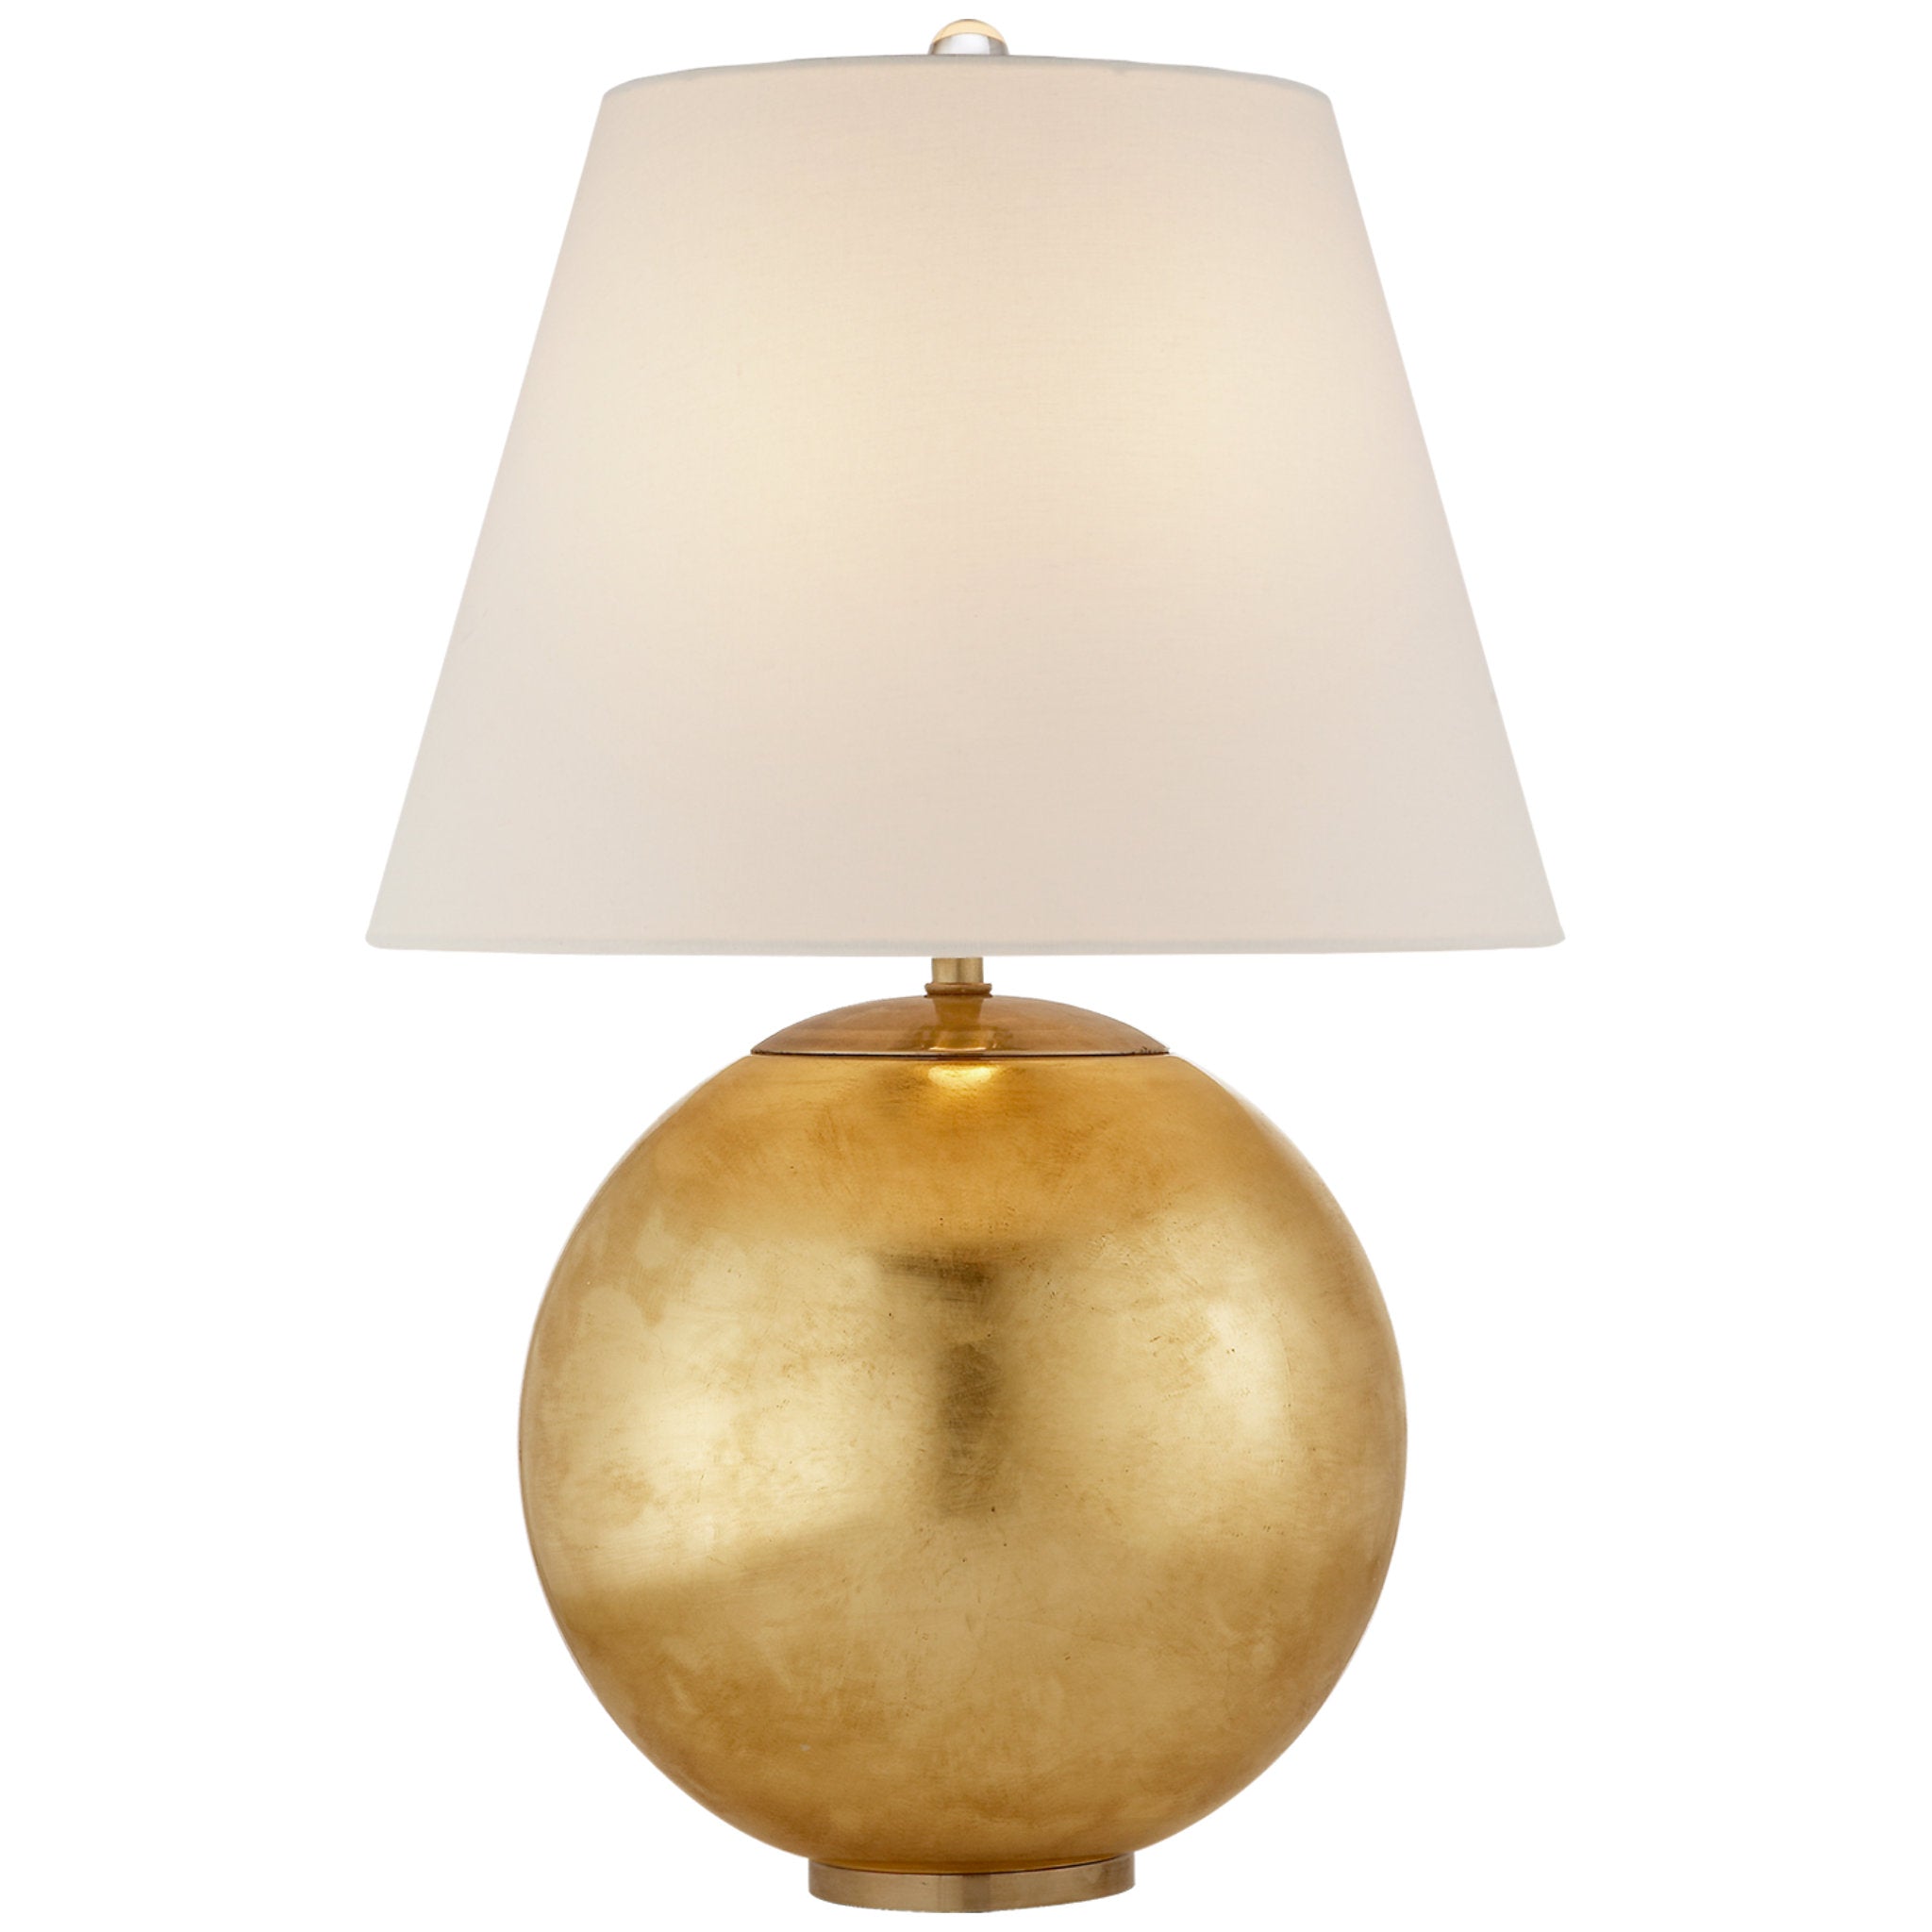 AERIN Morton Table Lamp in Gild with Linen Shade